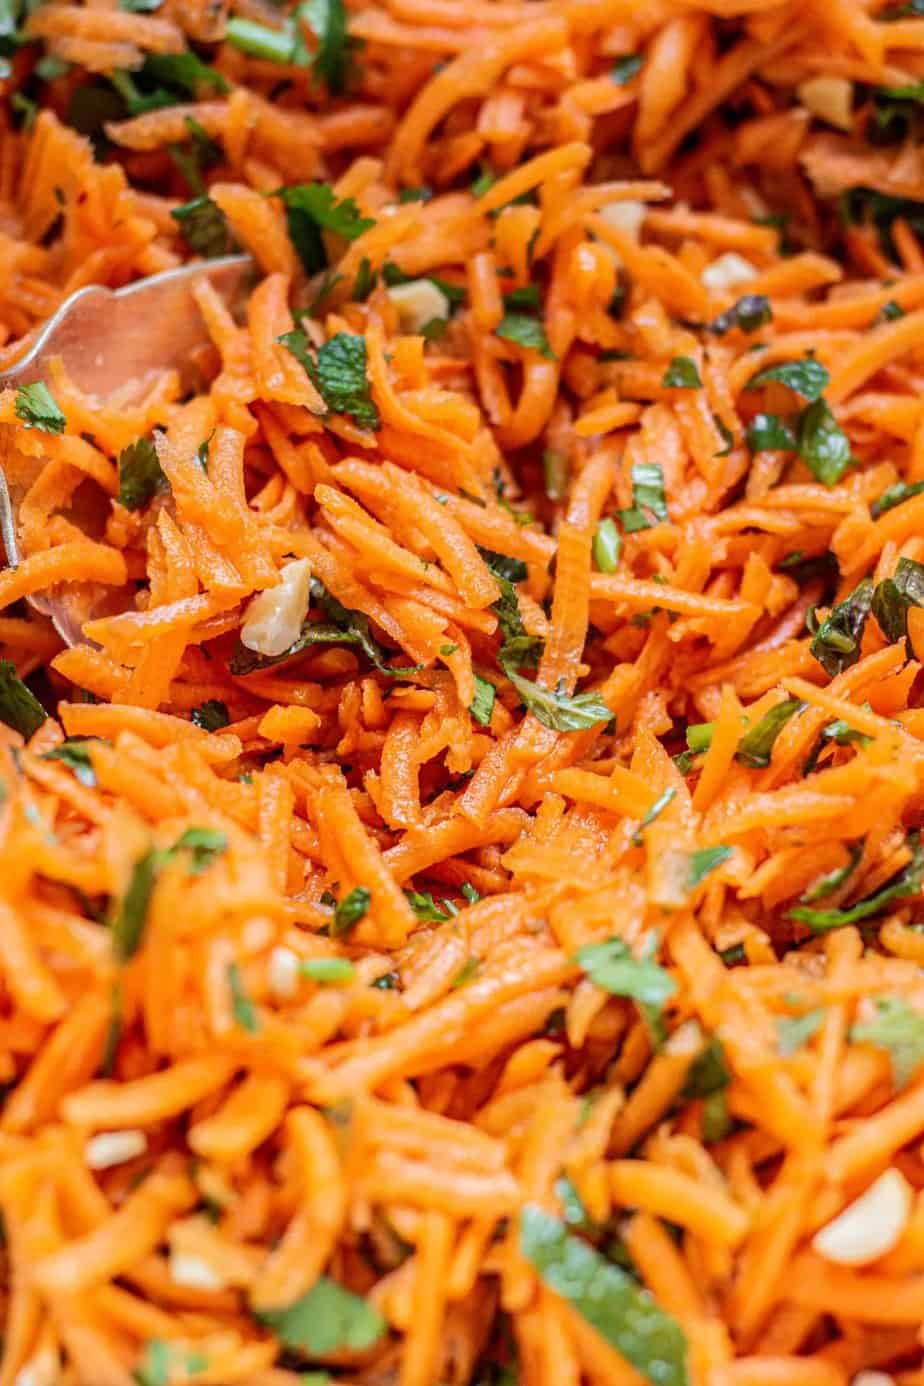 close up of raw shredded carrots.